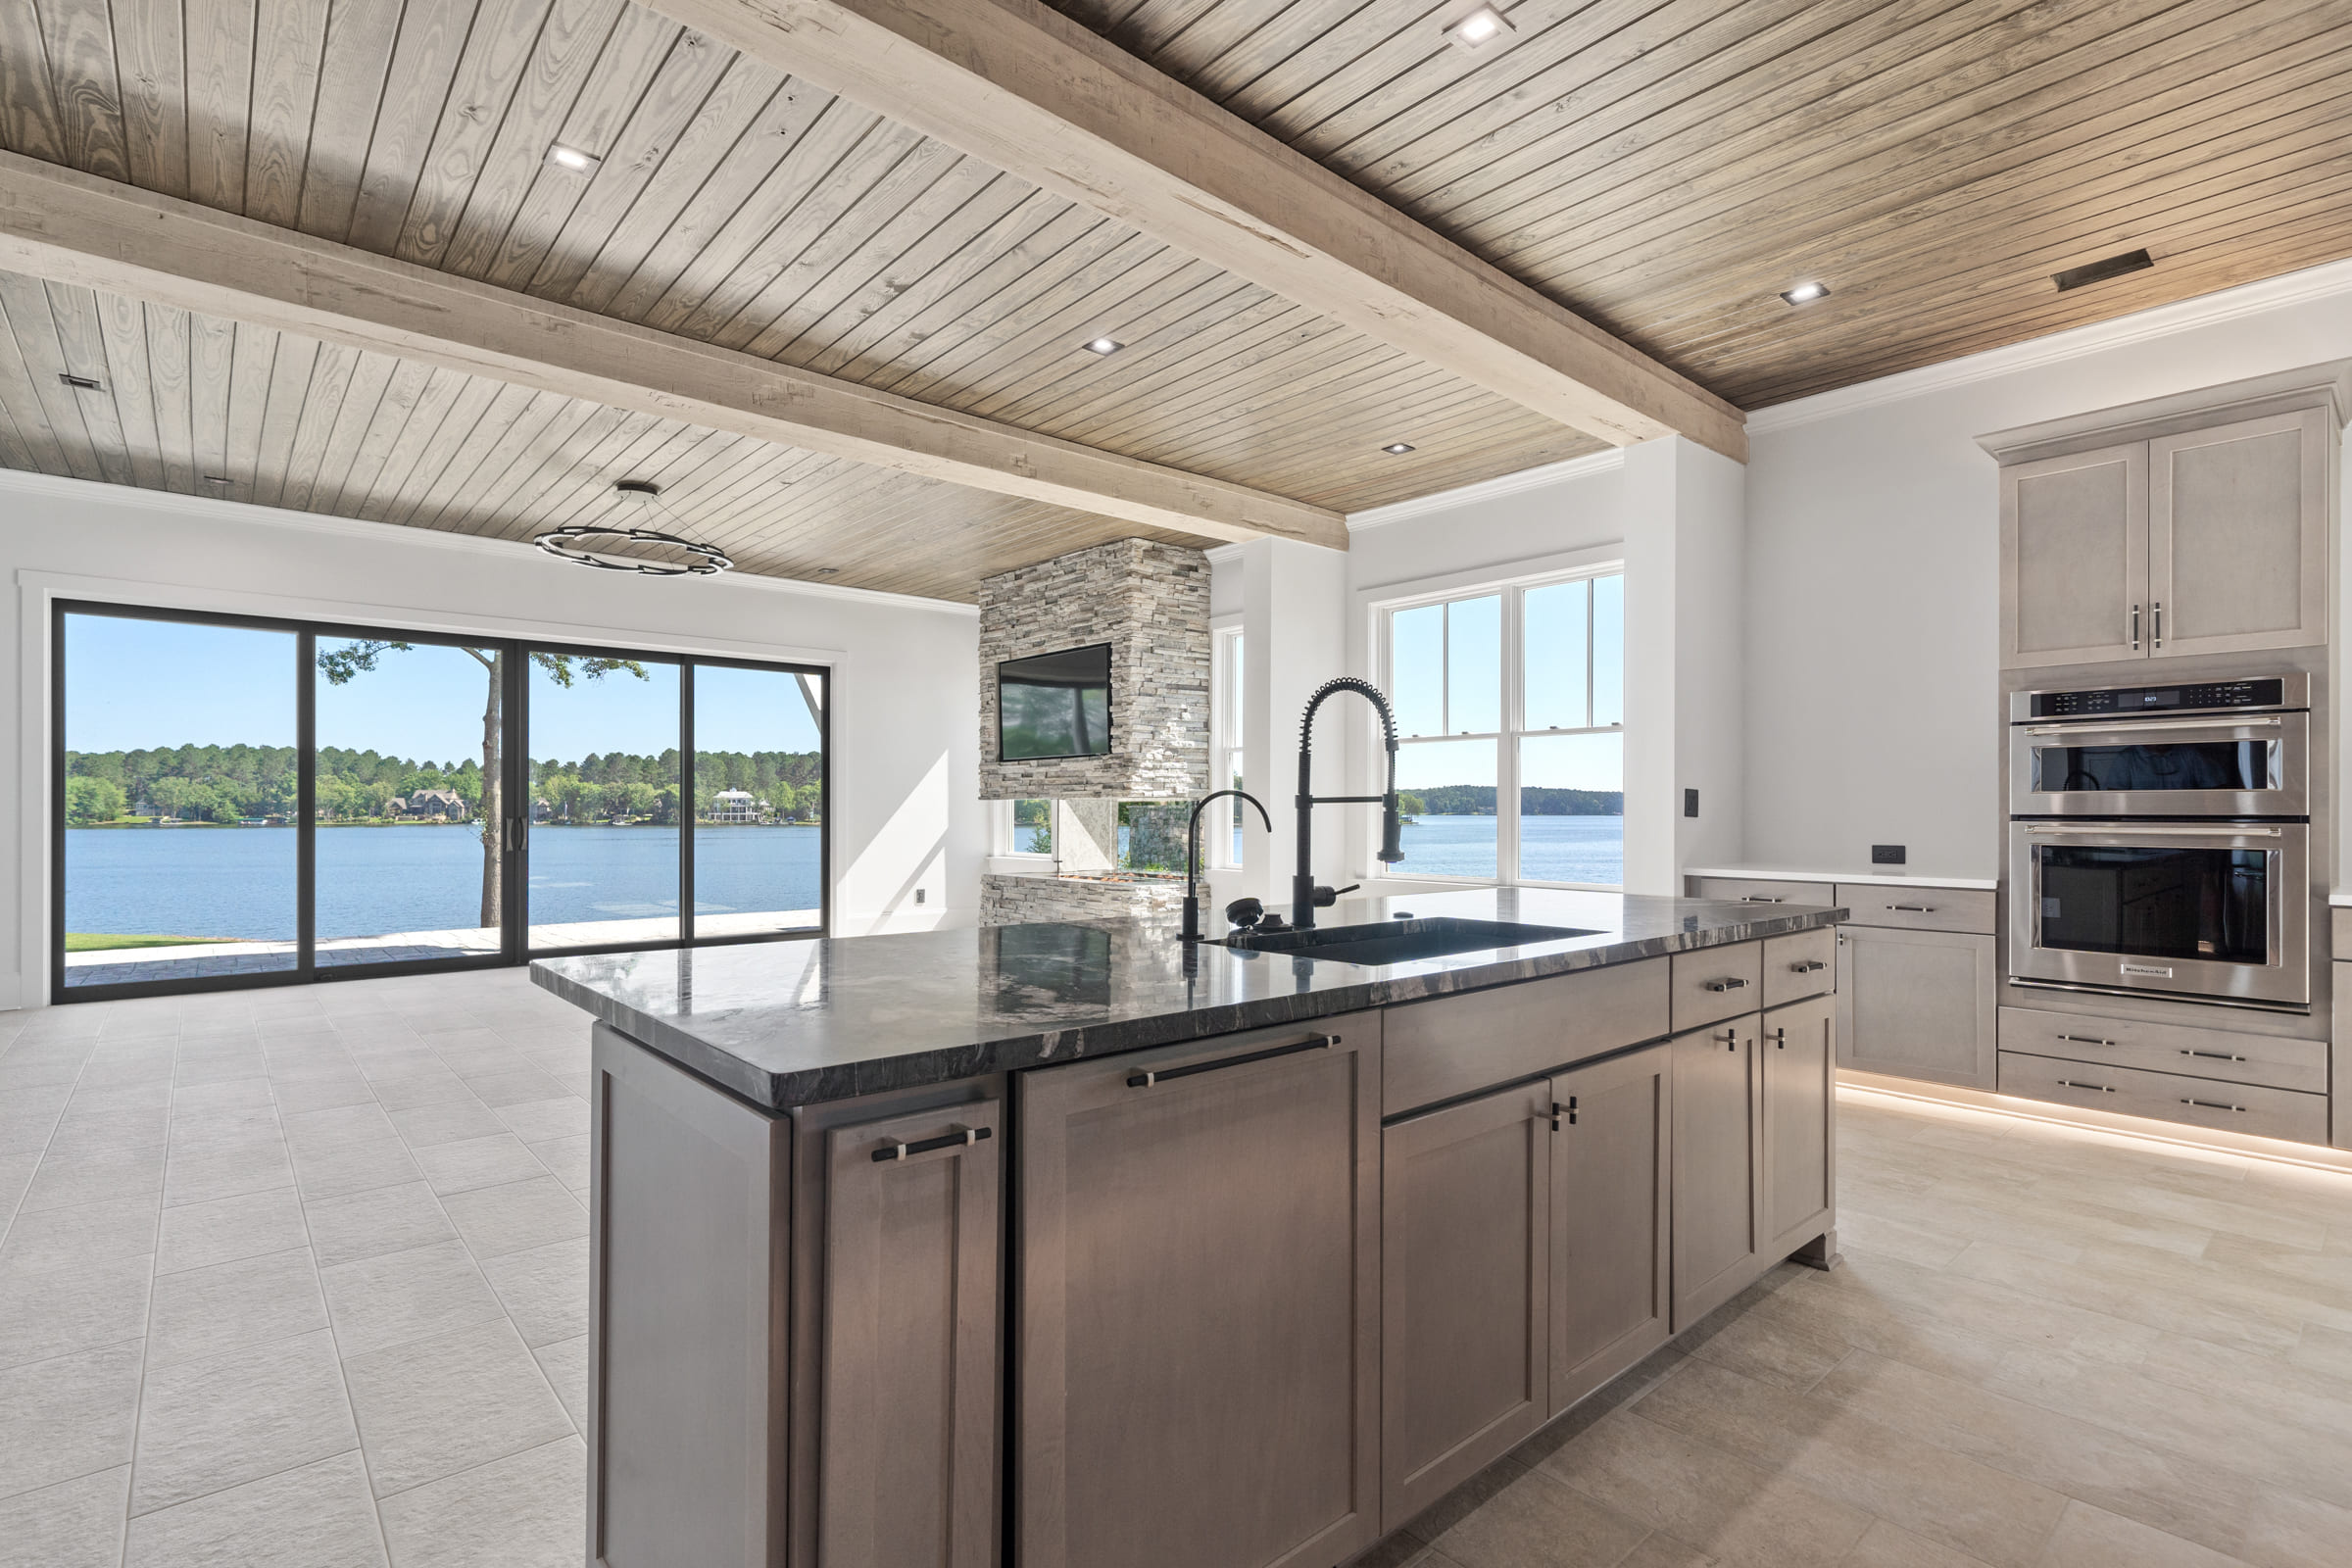 View of Kitchen Island and Sink with Patio Doors |PAXISgroup